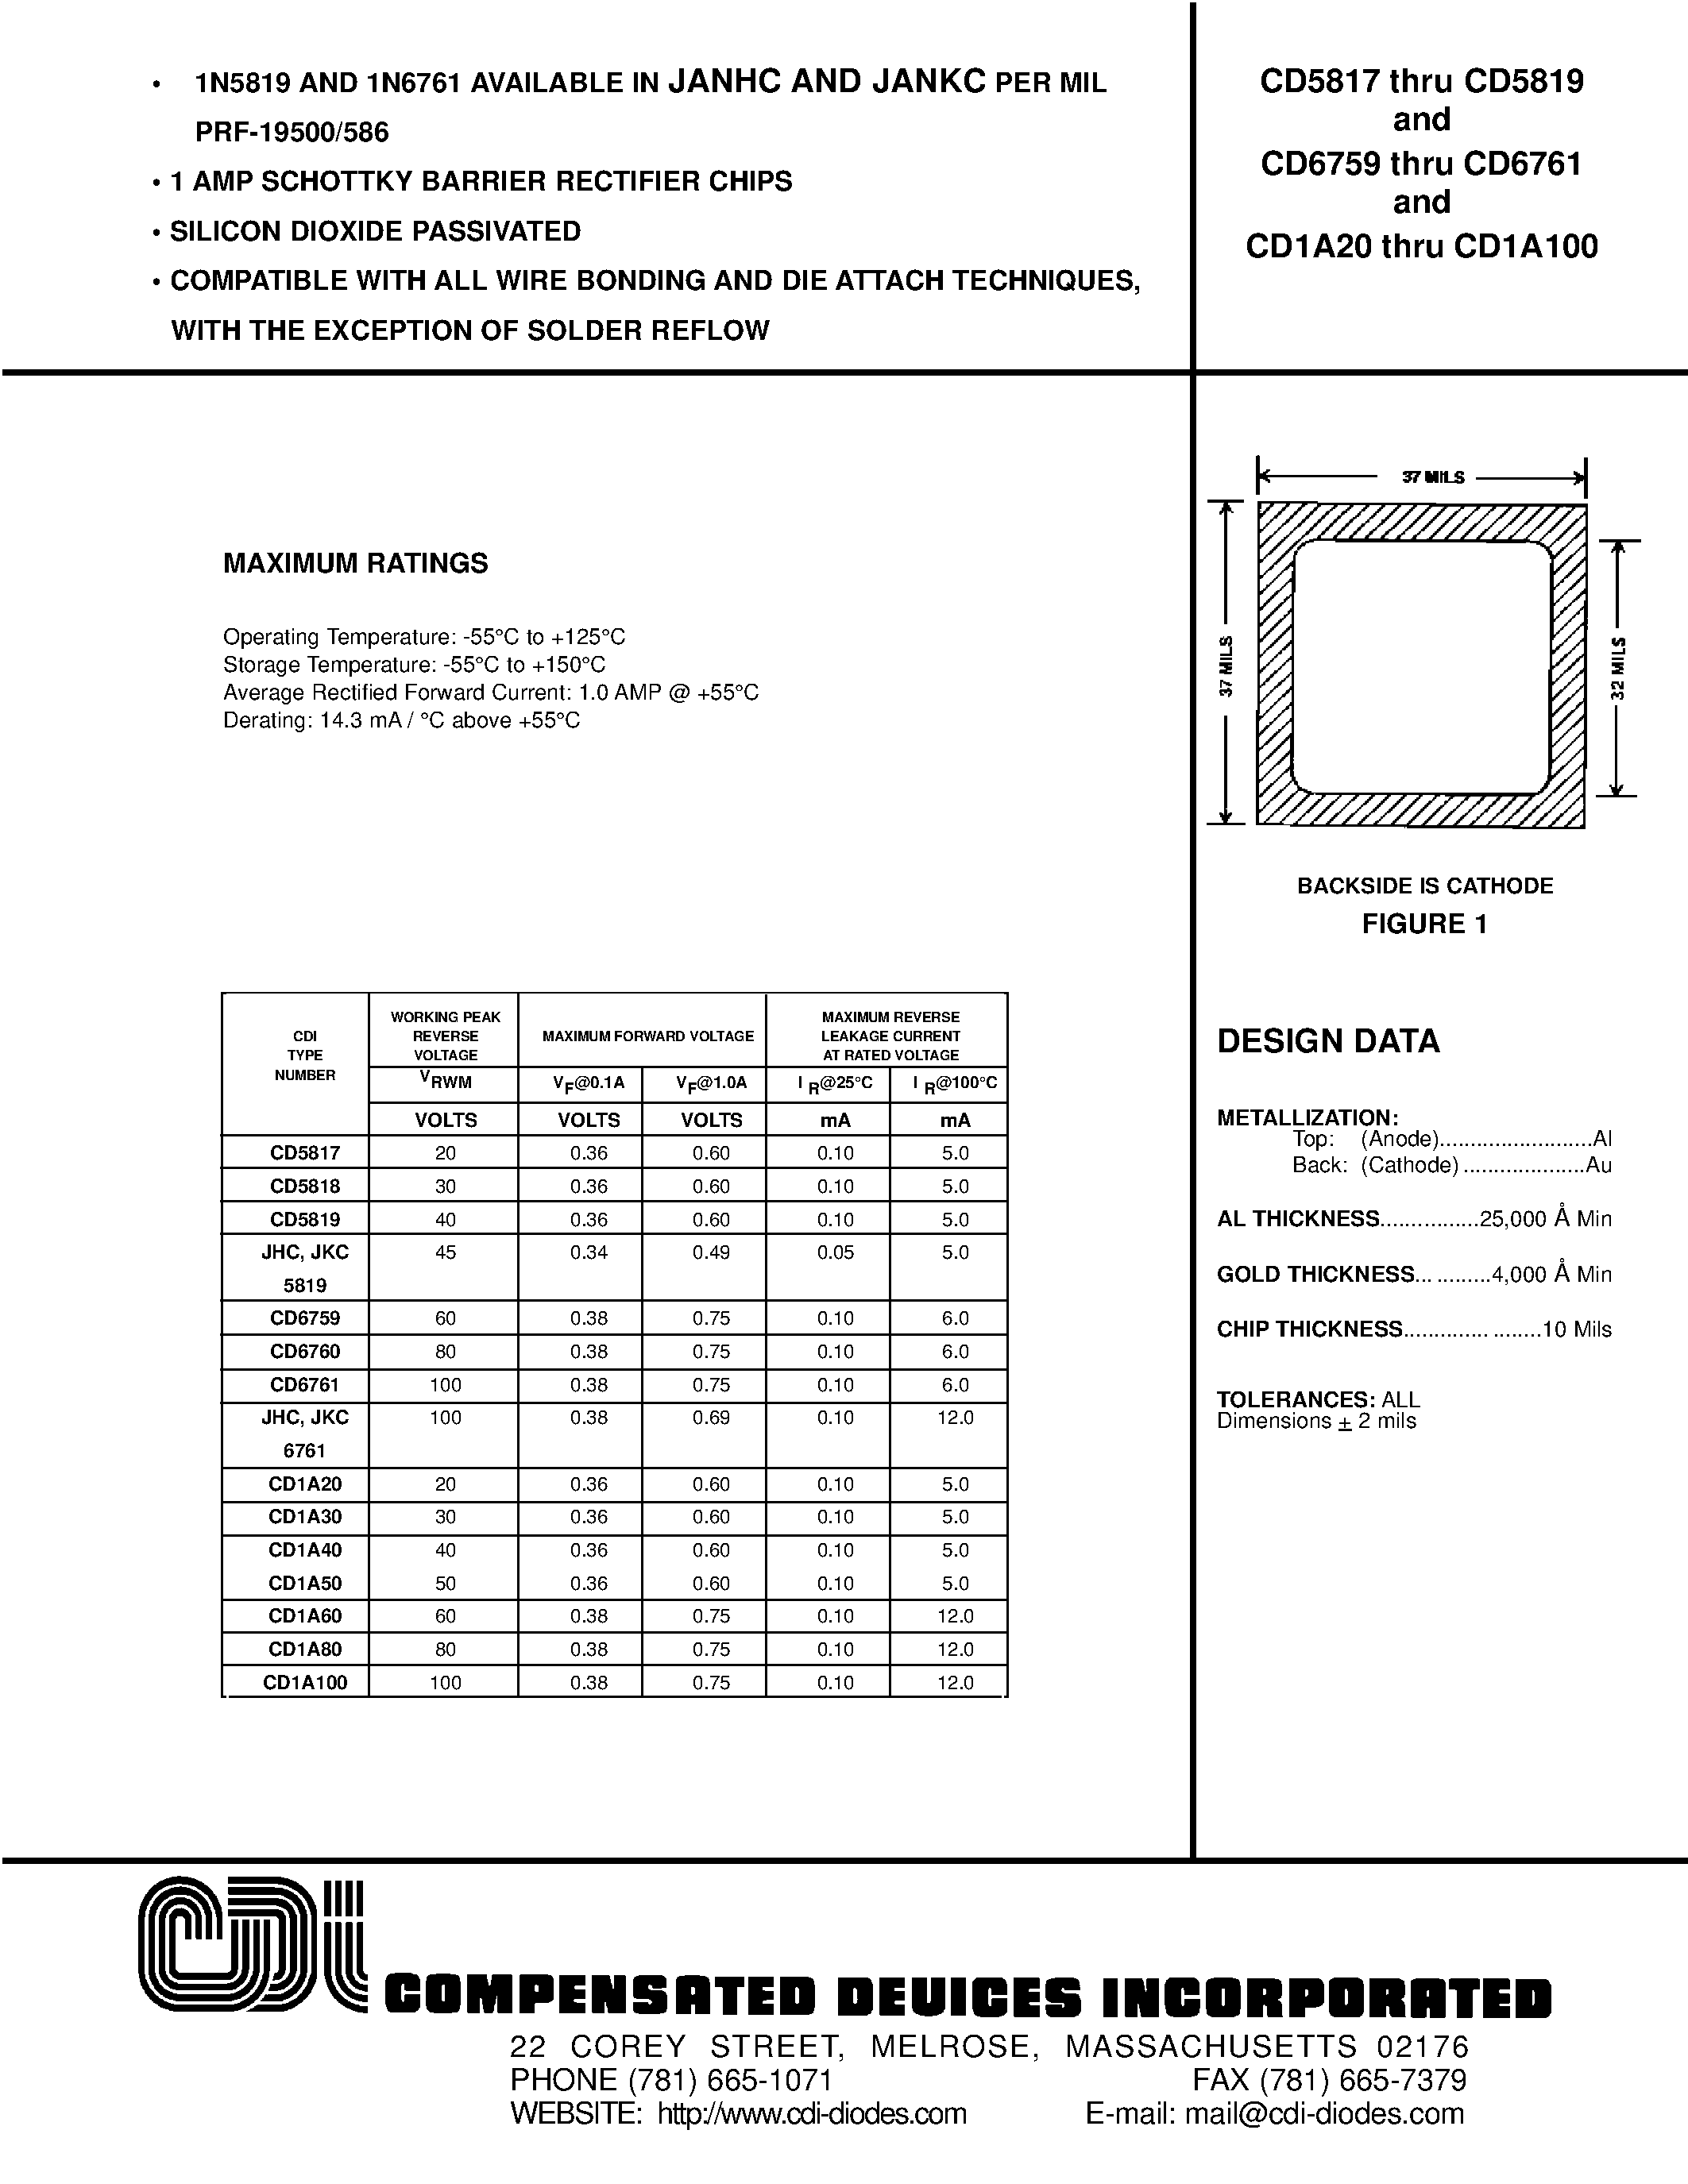 Datasheet CD1A30 - 1 AMP SCHOTTKY BARRIER RECTIFIER CHIPS page 1